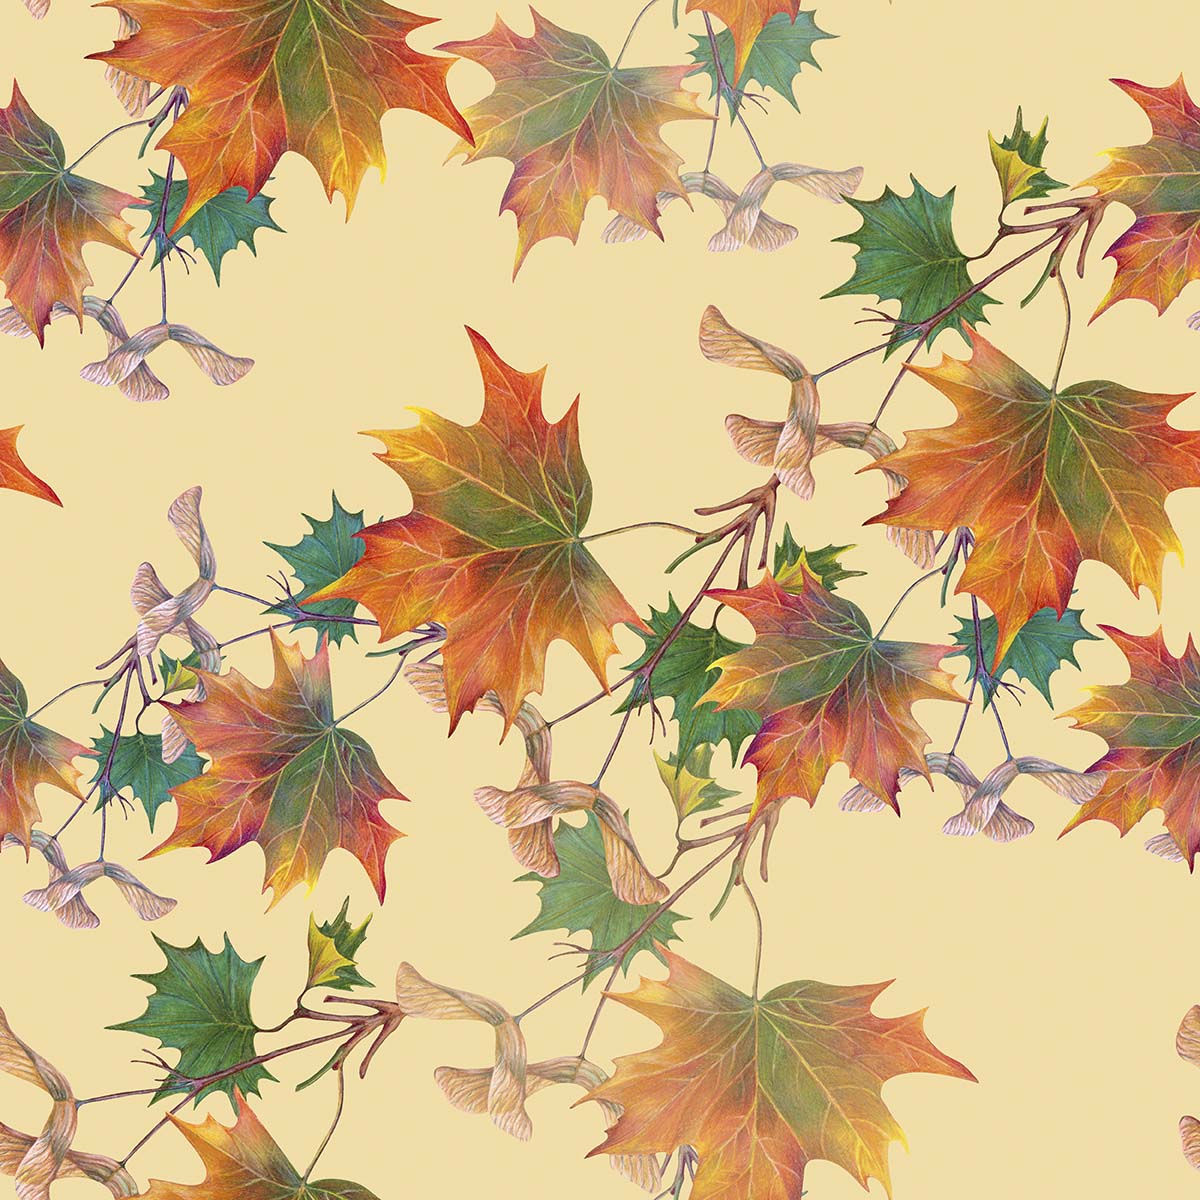 A pattern of colorful leaves